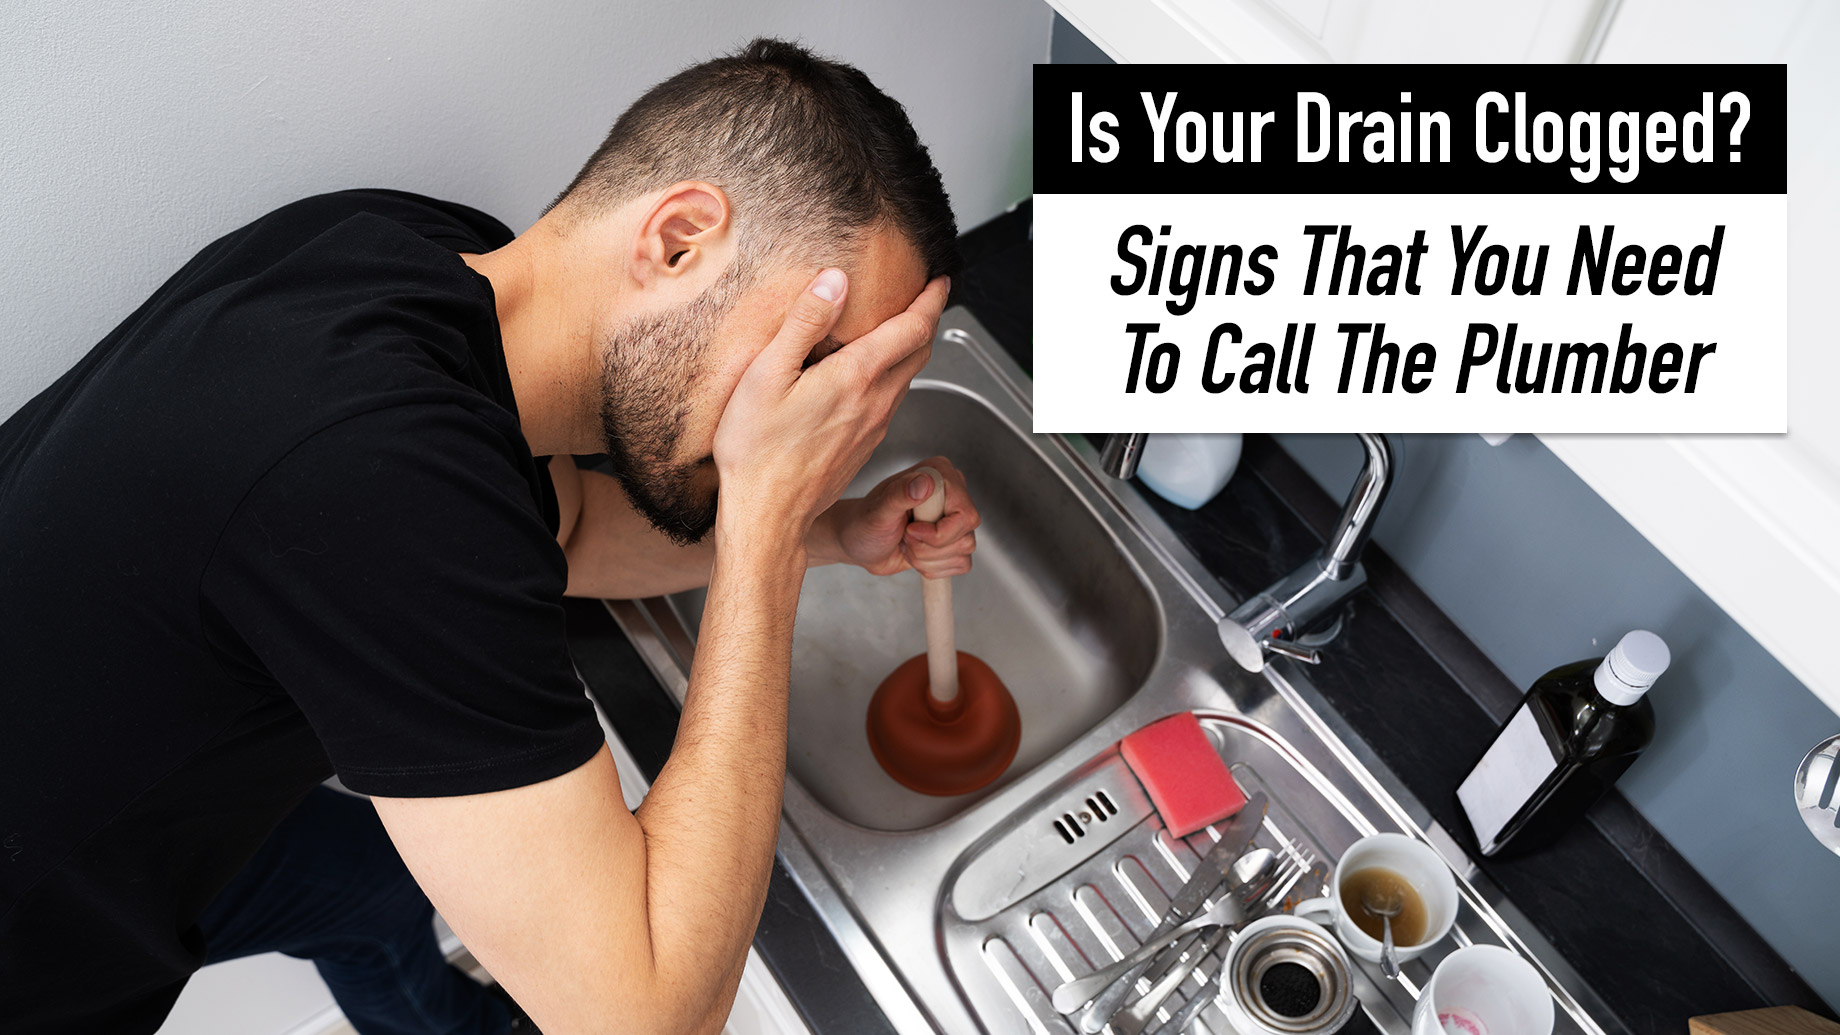 Is Your Drain Clogged? Signs That You Need To Call The Plumber